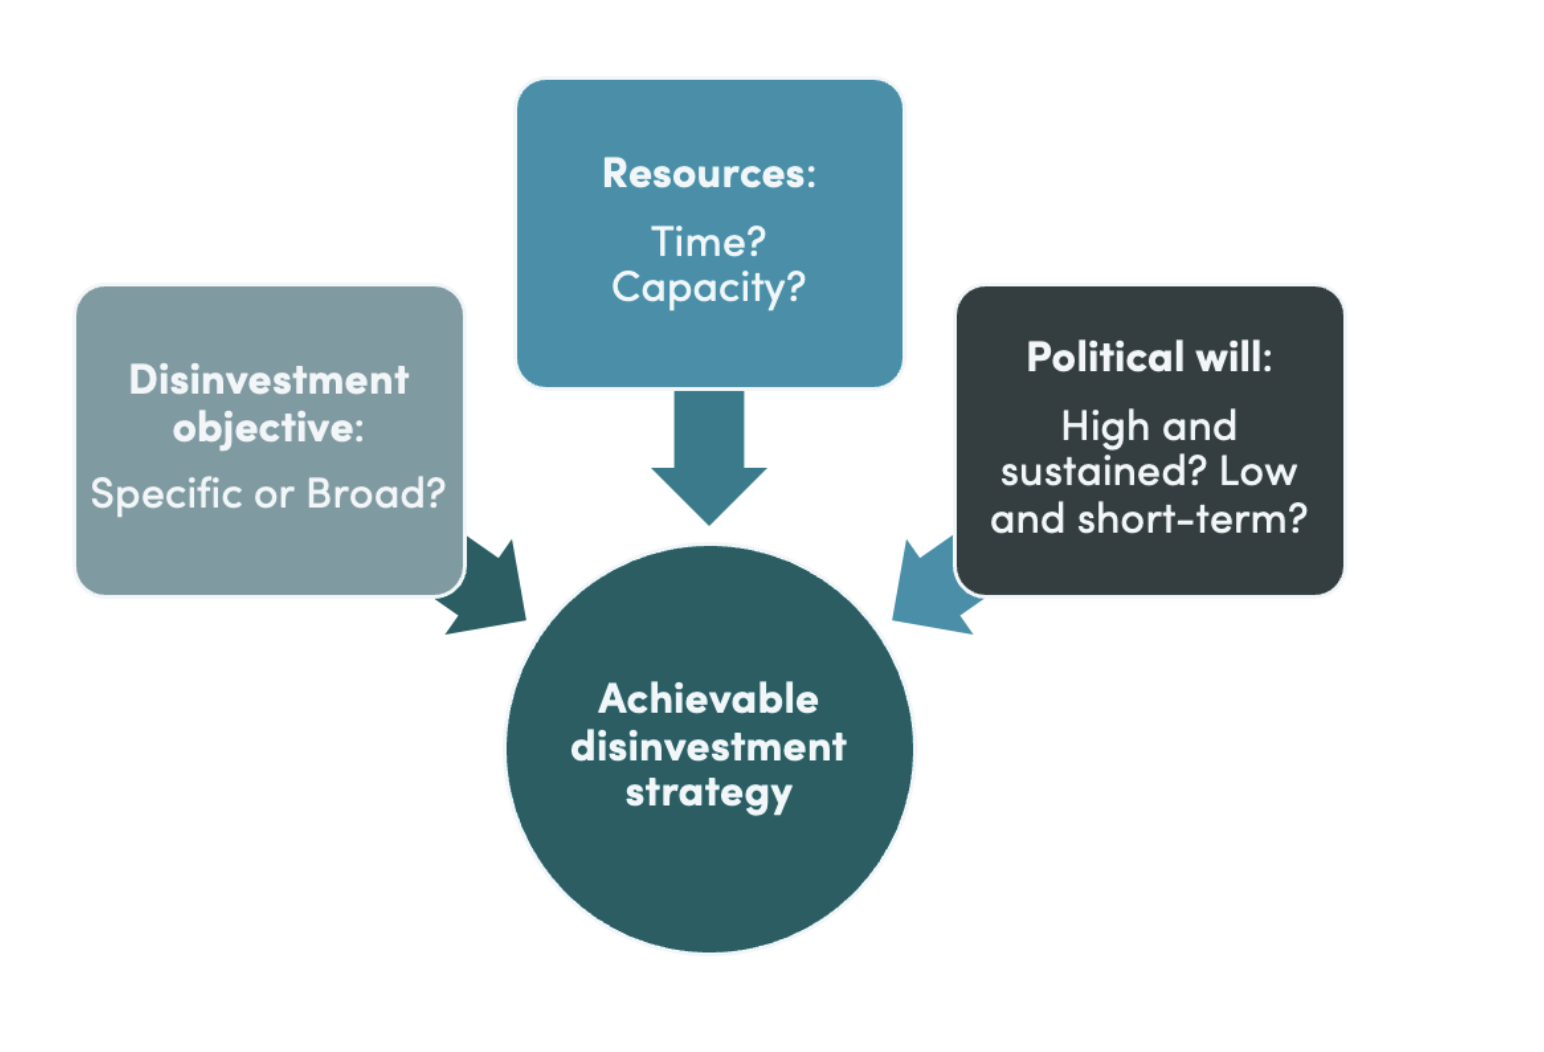 Three factors to consider when designing an achievable disinvestment strategy